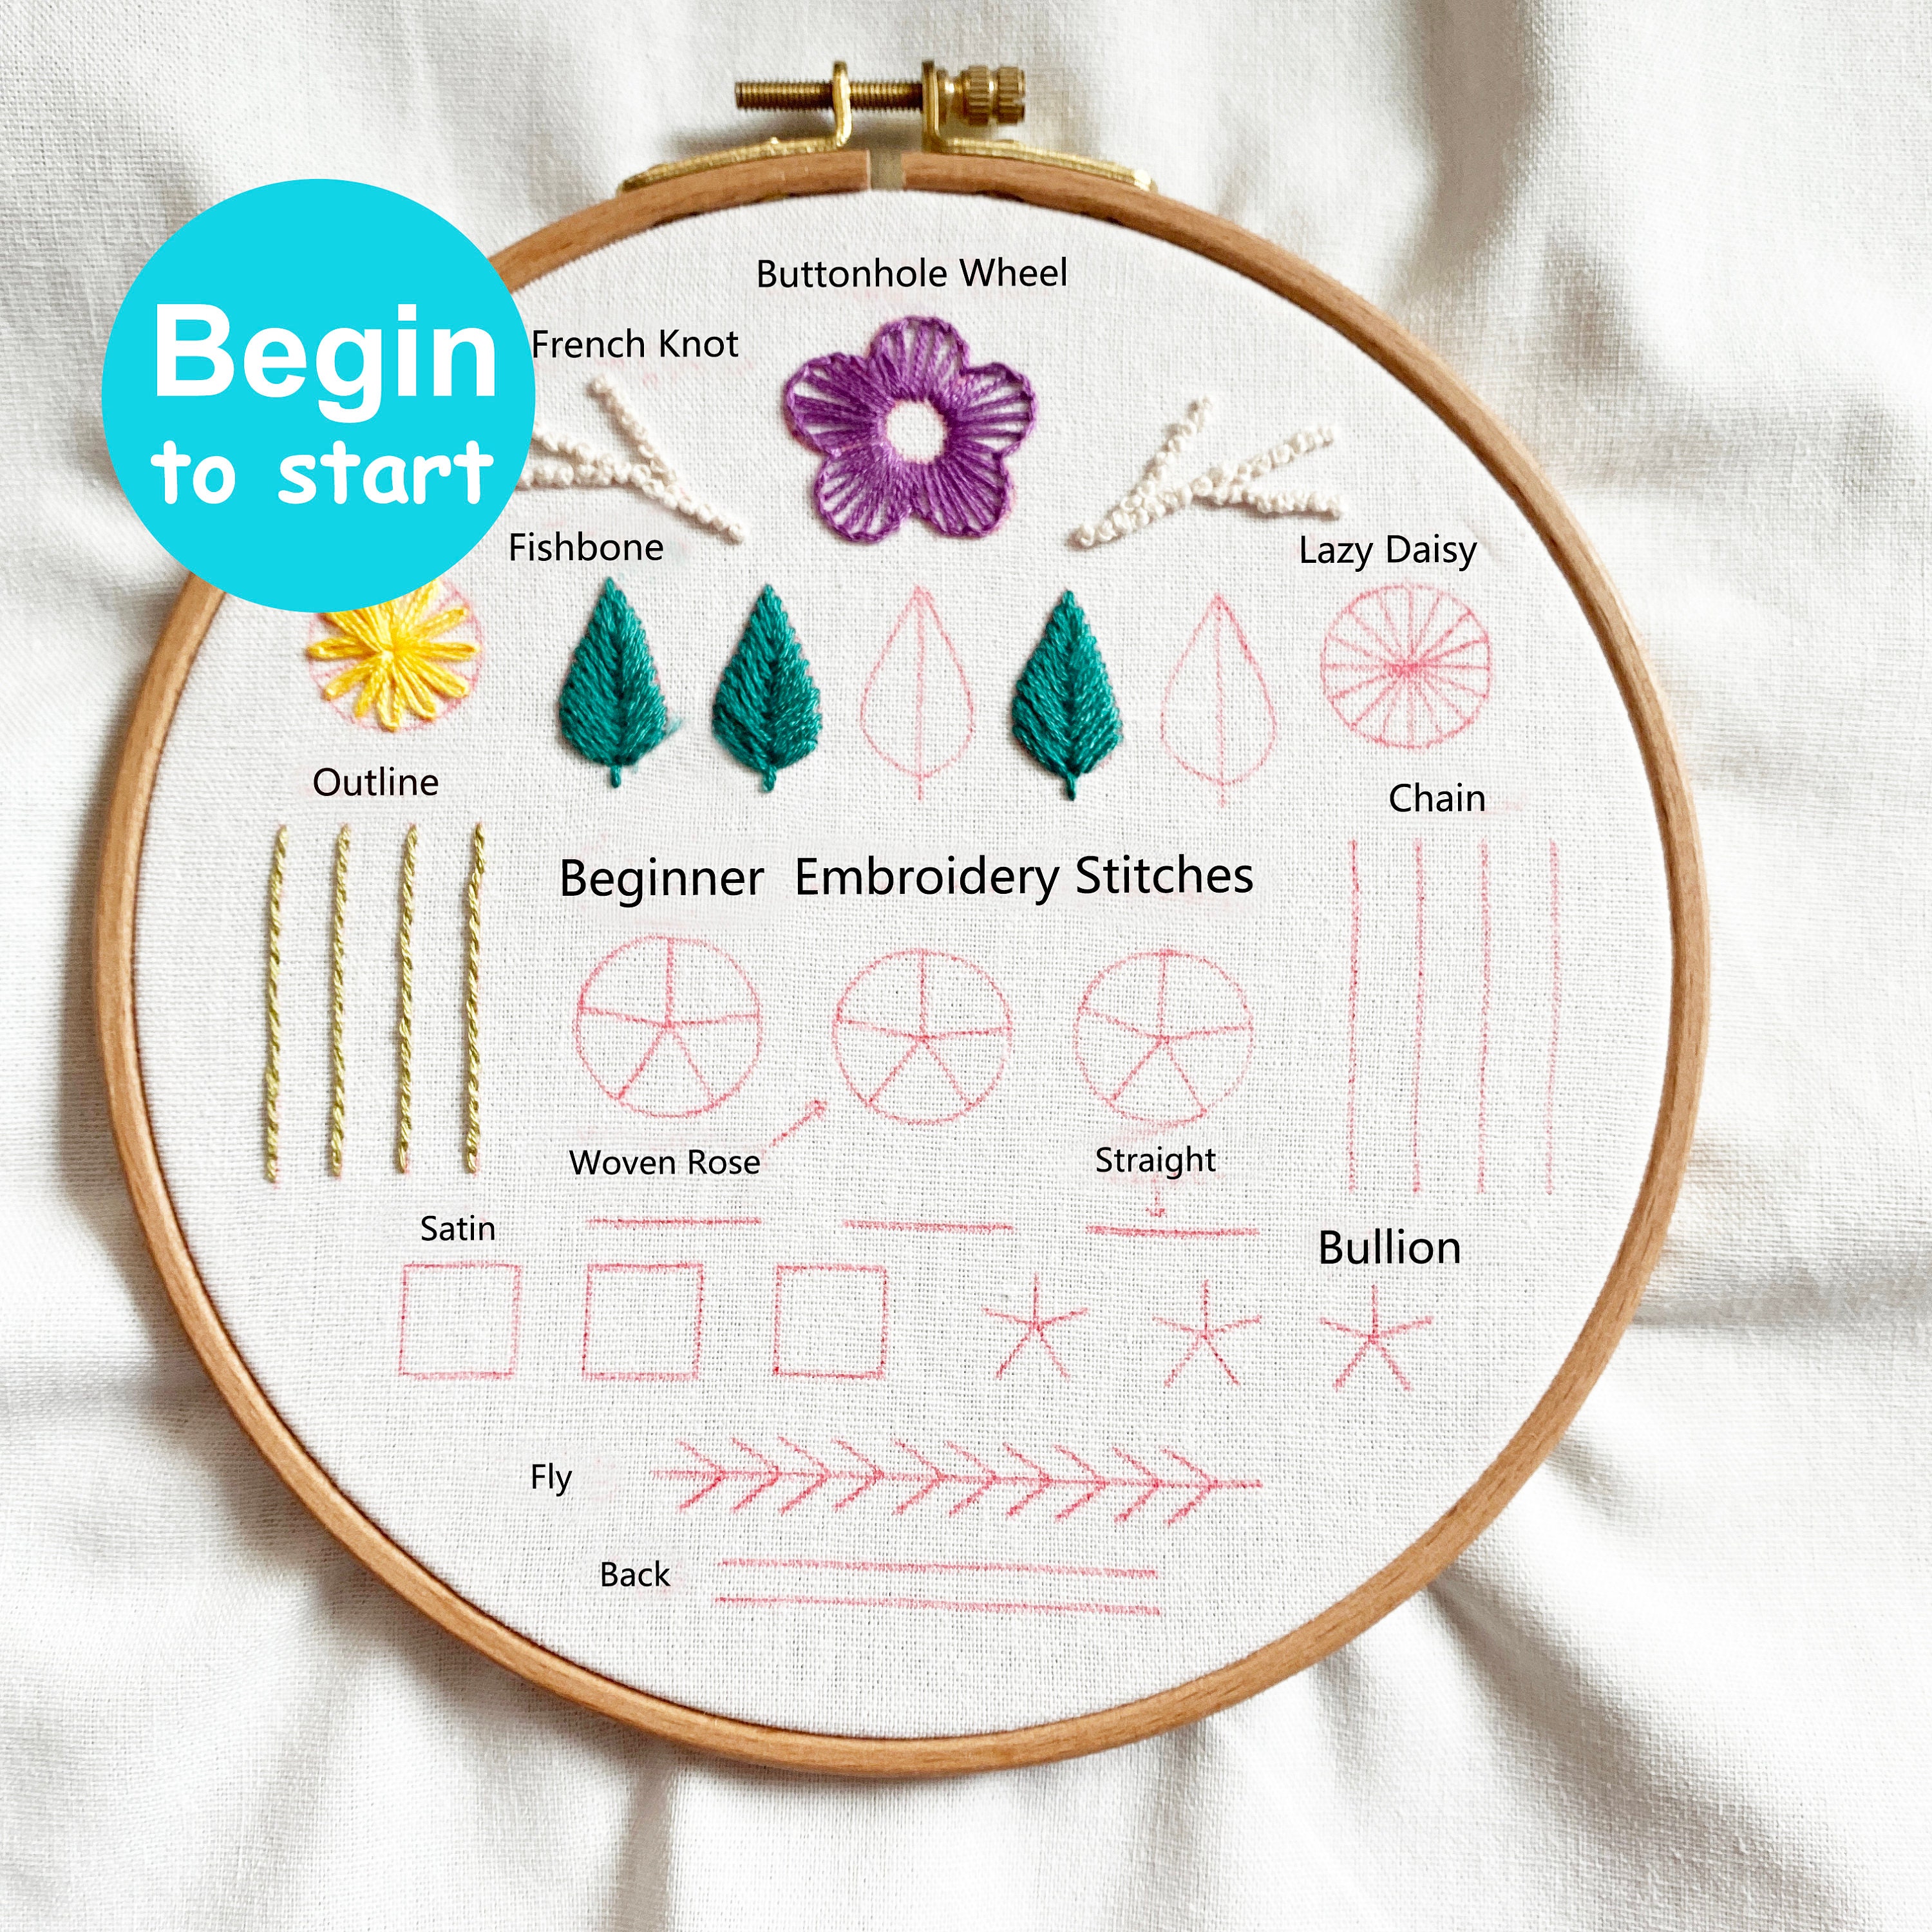 Baker Ross Plain Cross Stitch Kits for Beginners (Pack of 6) Embroidery Set with Thread for Kids